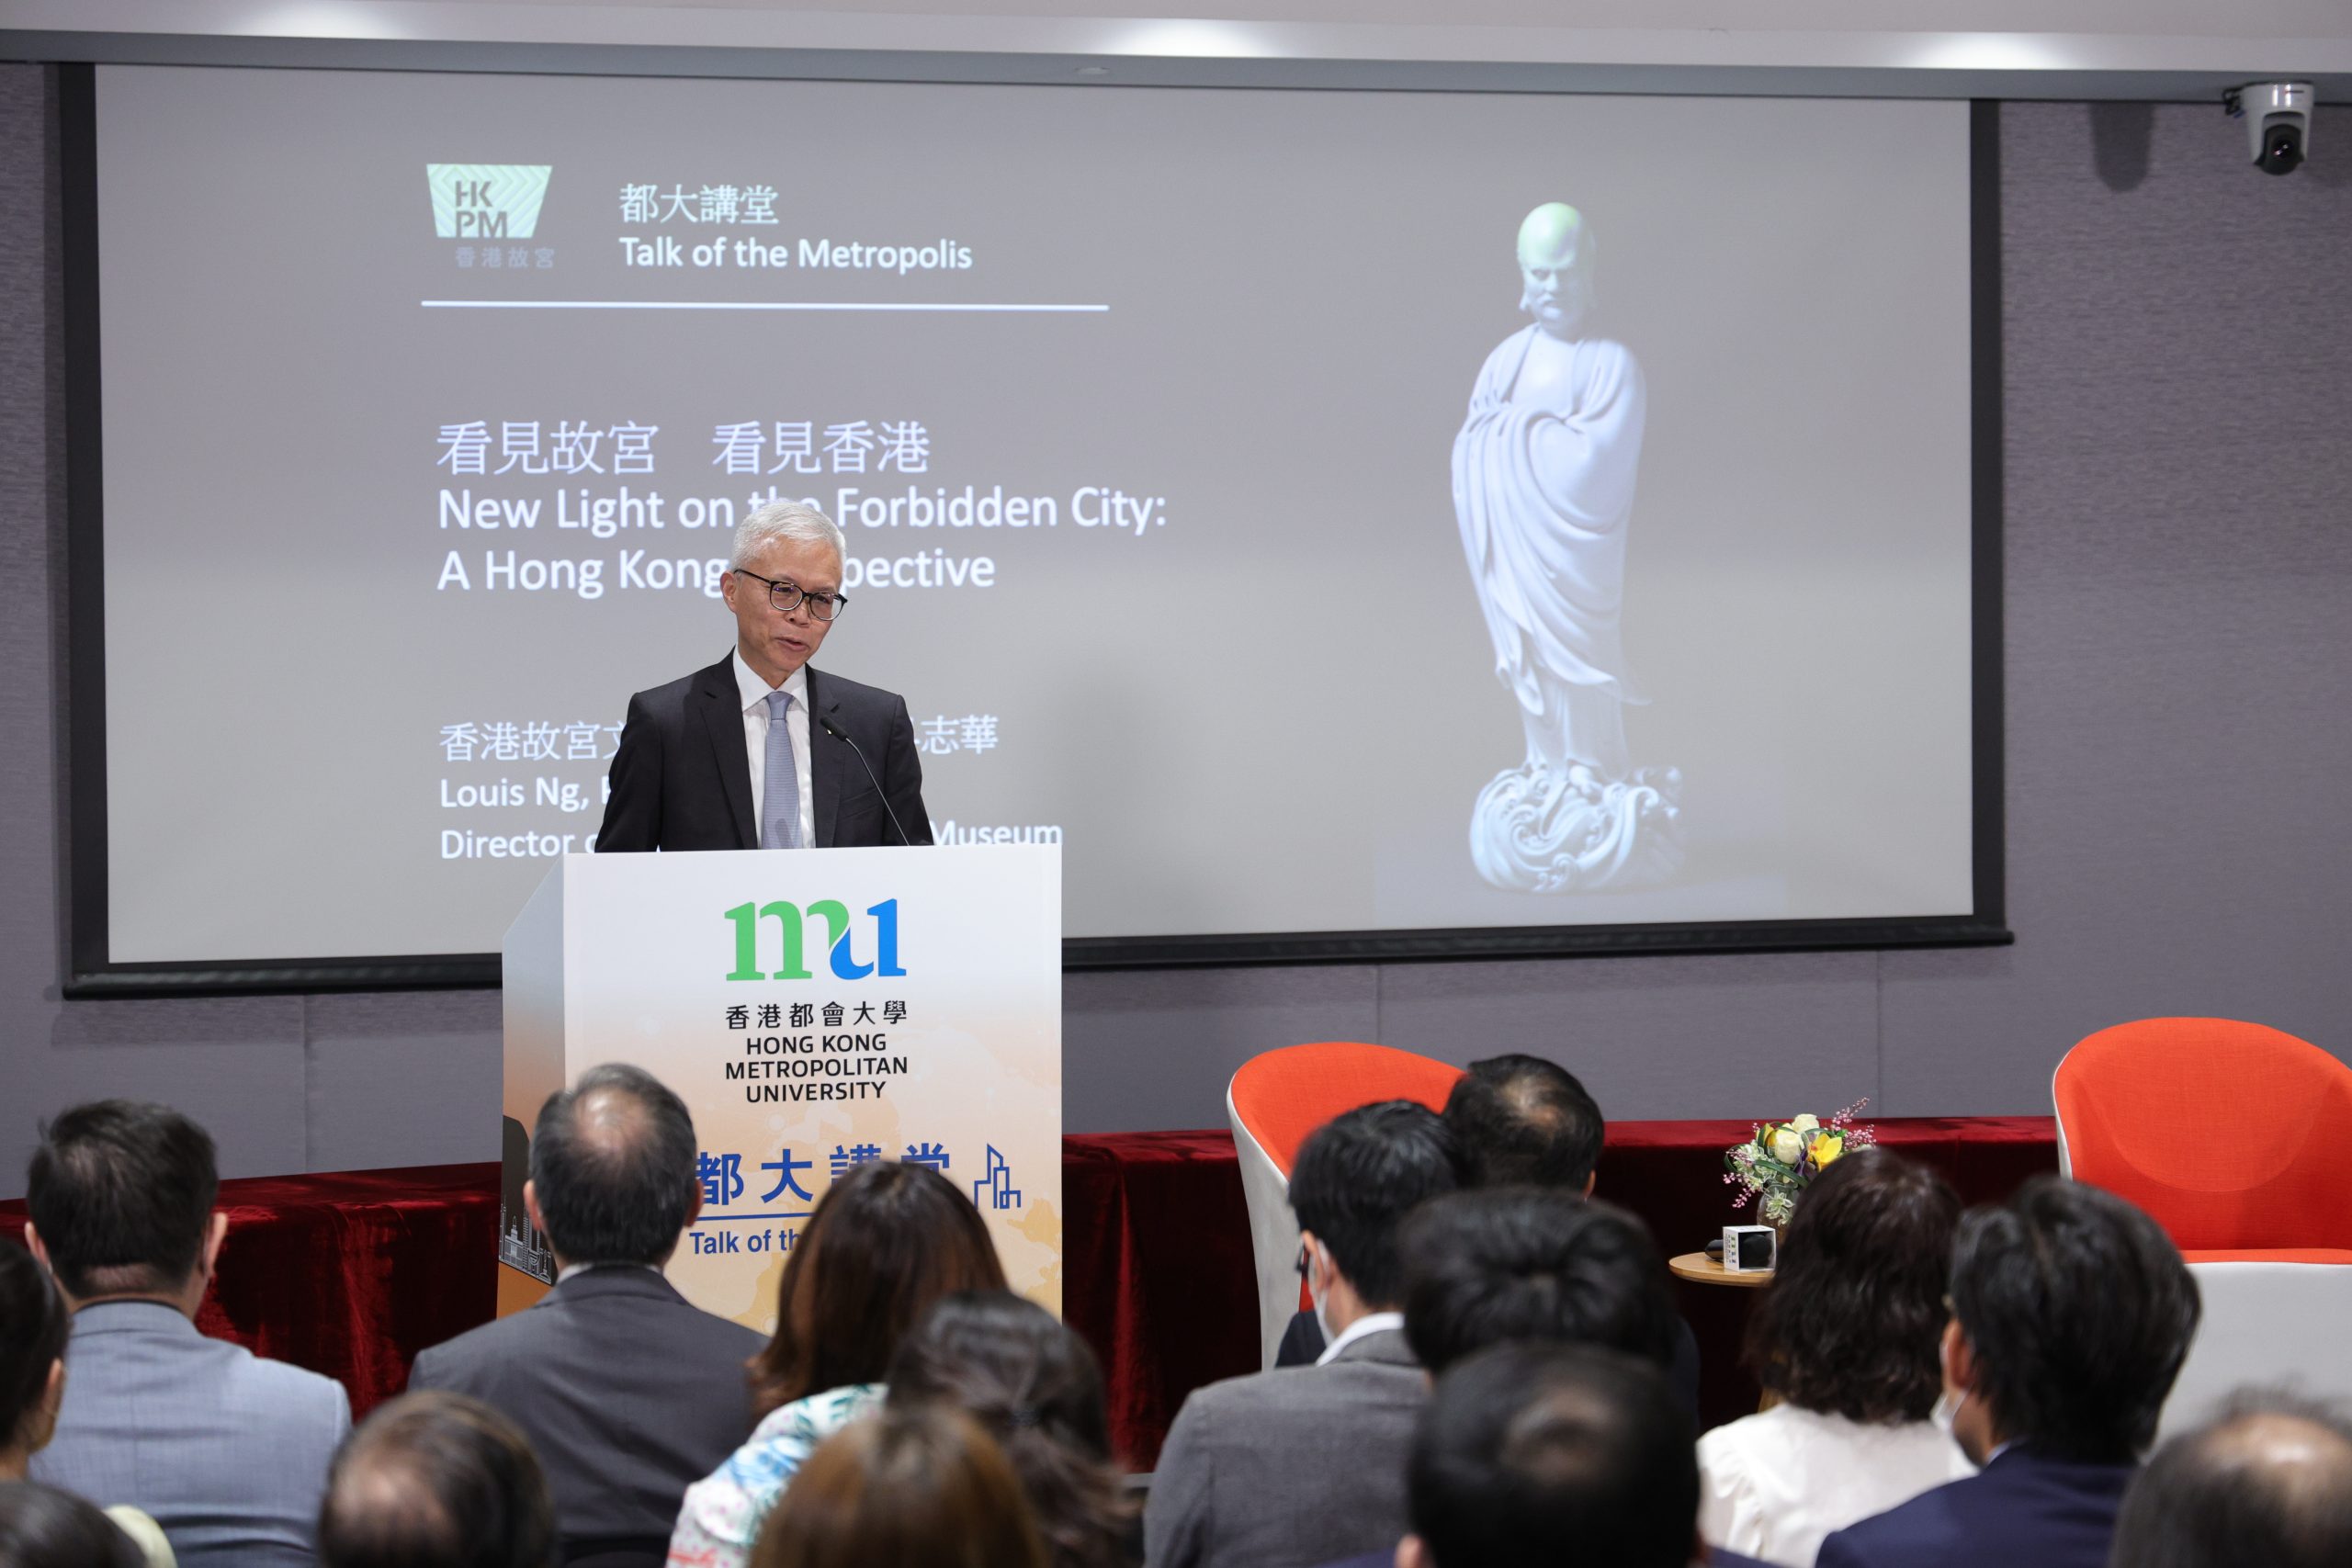 Dr Louis Ng Chi-wa, Director of the Hong Kong Palace Museum, shares his experience in planning the Hong Kong Palace Museum on the topic "New Light on the Forbidden City: A Hong Kong Perspective" at the HKMU’s "Talk of the Metropolis".